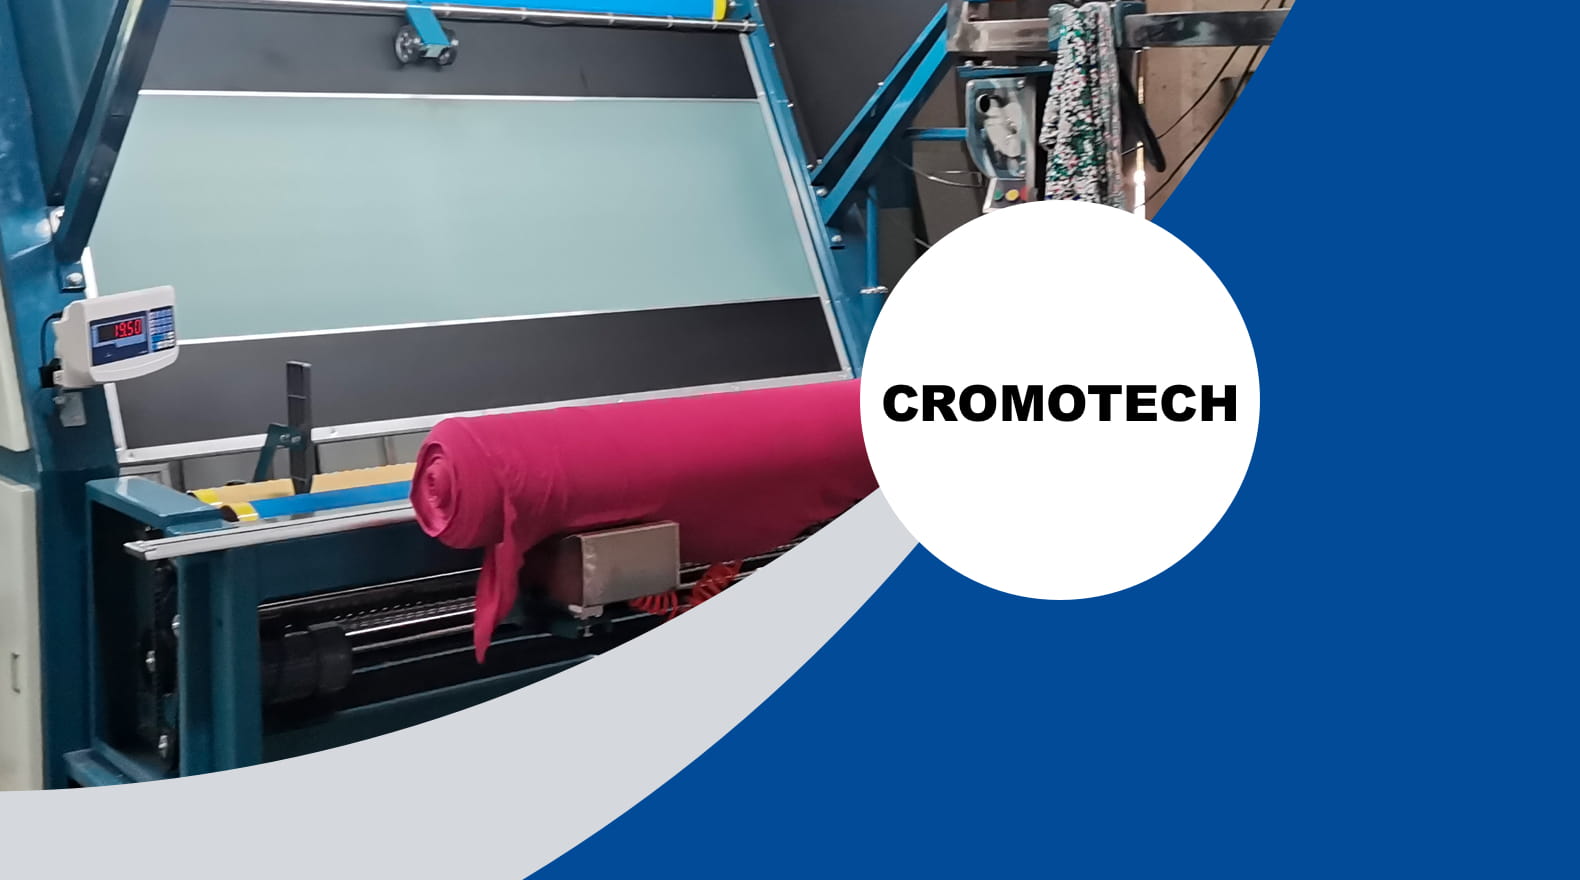  <strong>CROMOTECH</strong> 